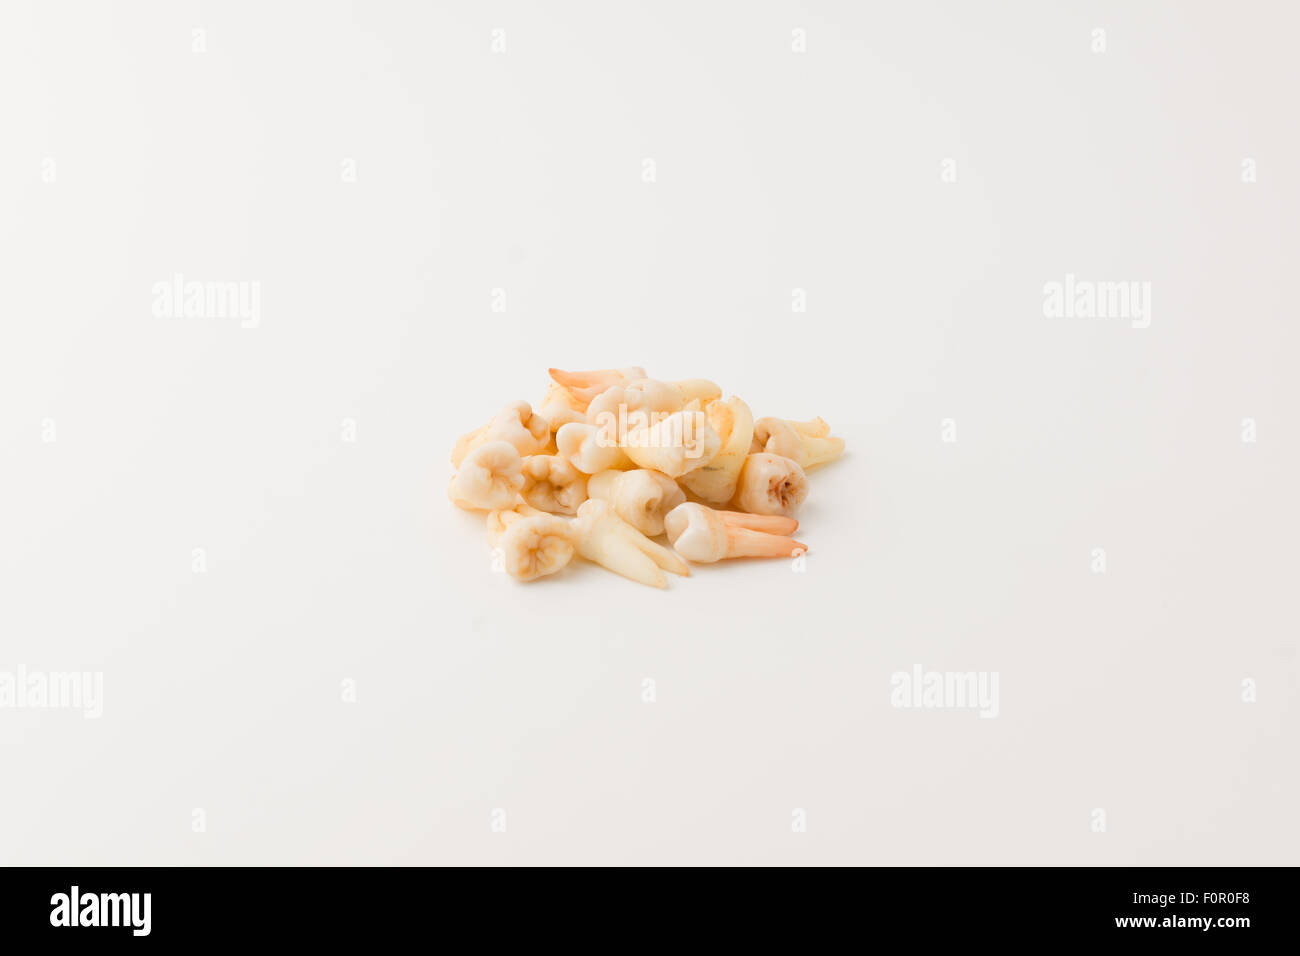 set of the extracted human teeth on a white background Stock Photo